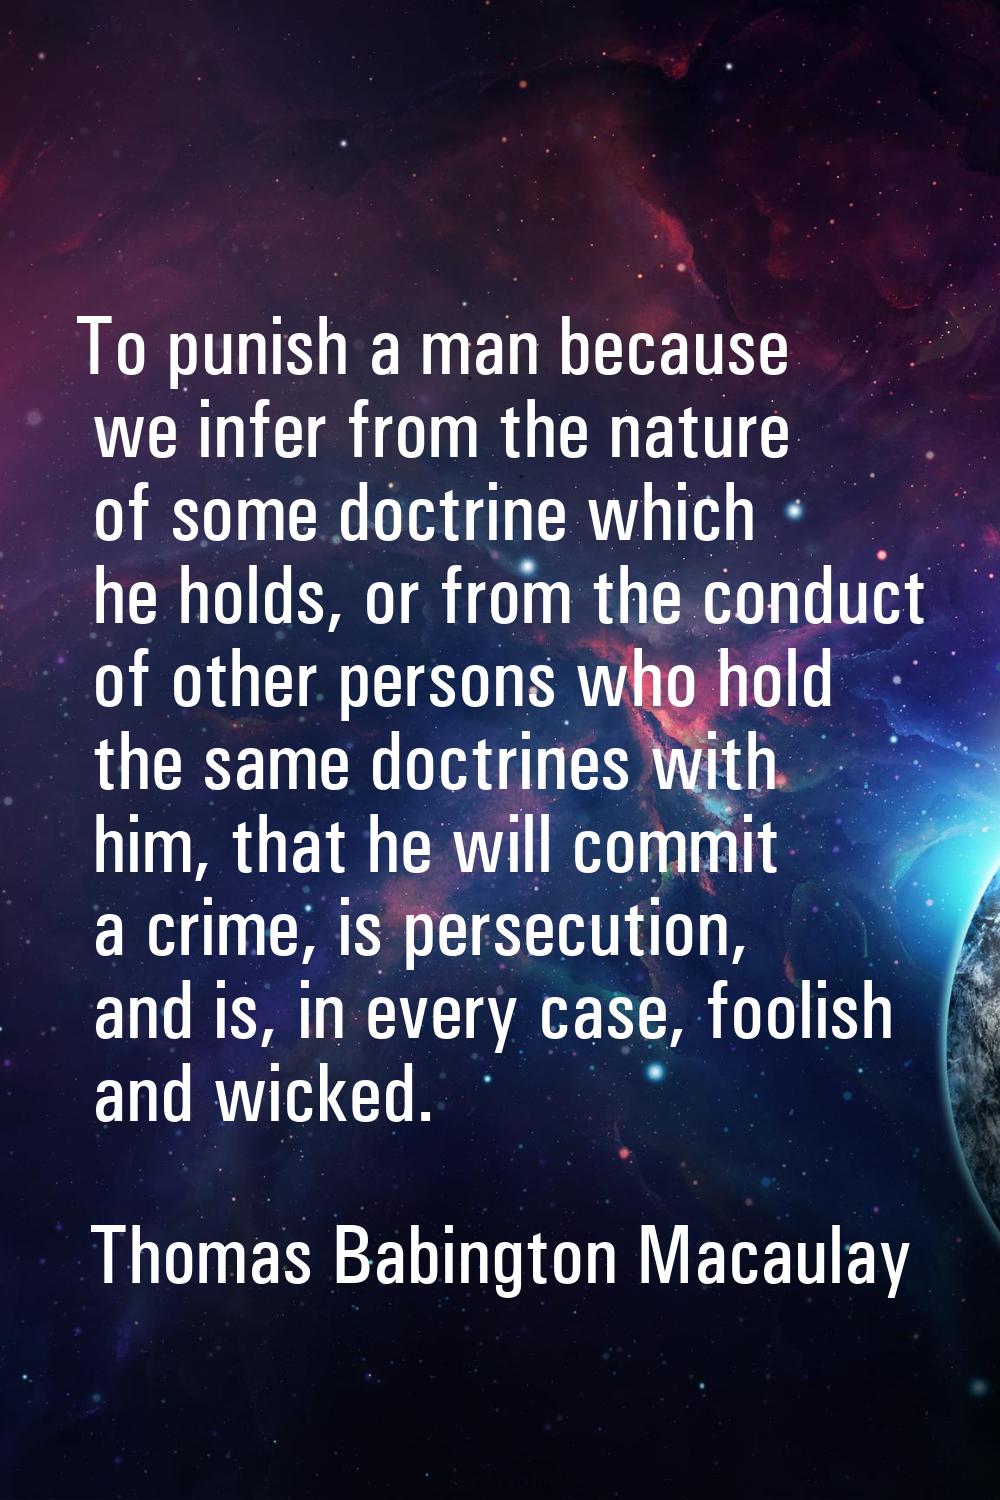 To punish a man because we infer from the nature of some doctrine which he holds, or from the condu